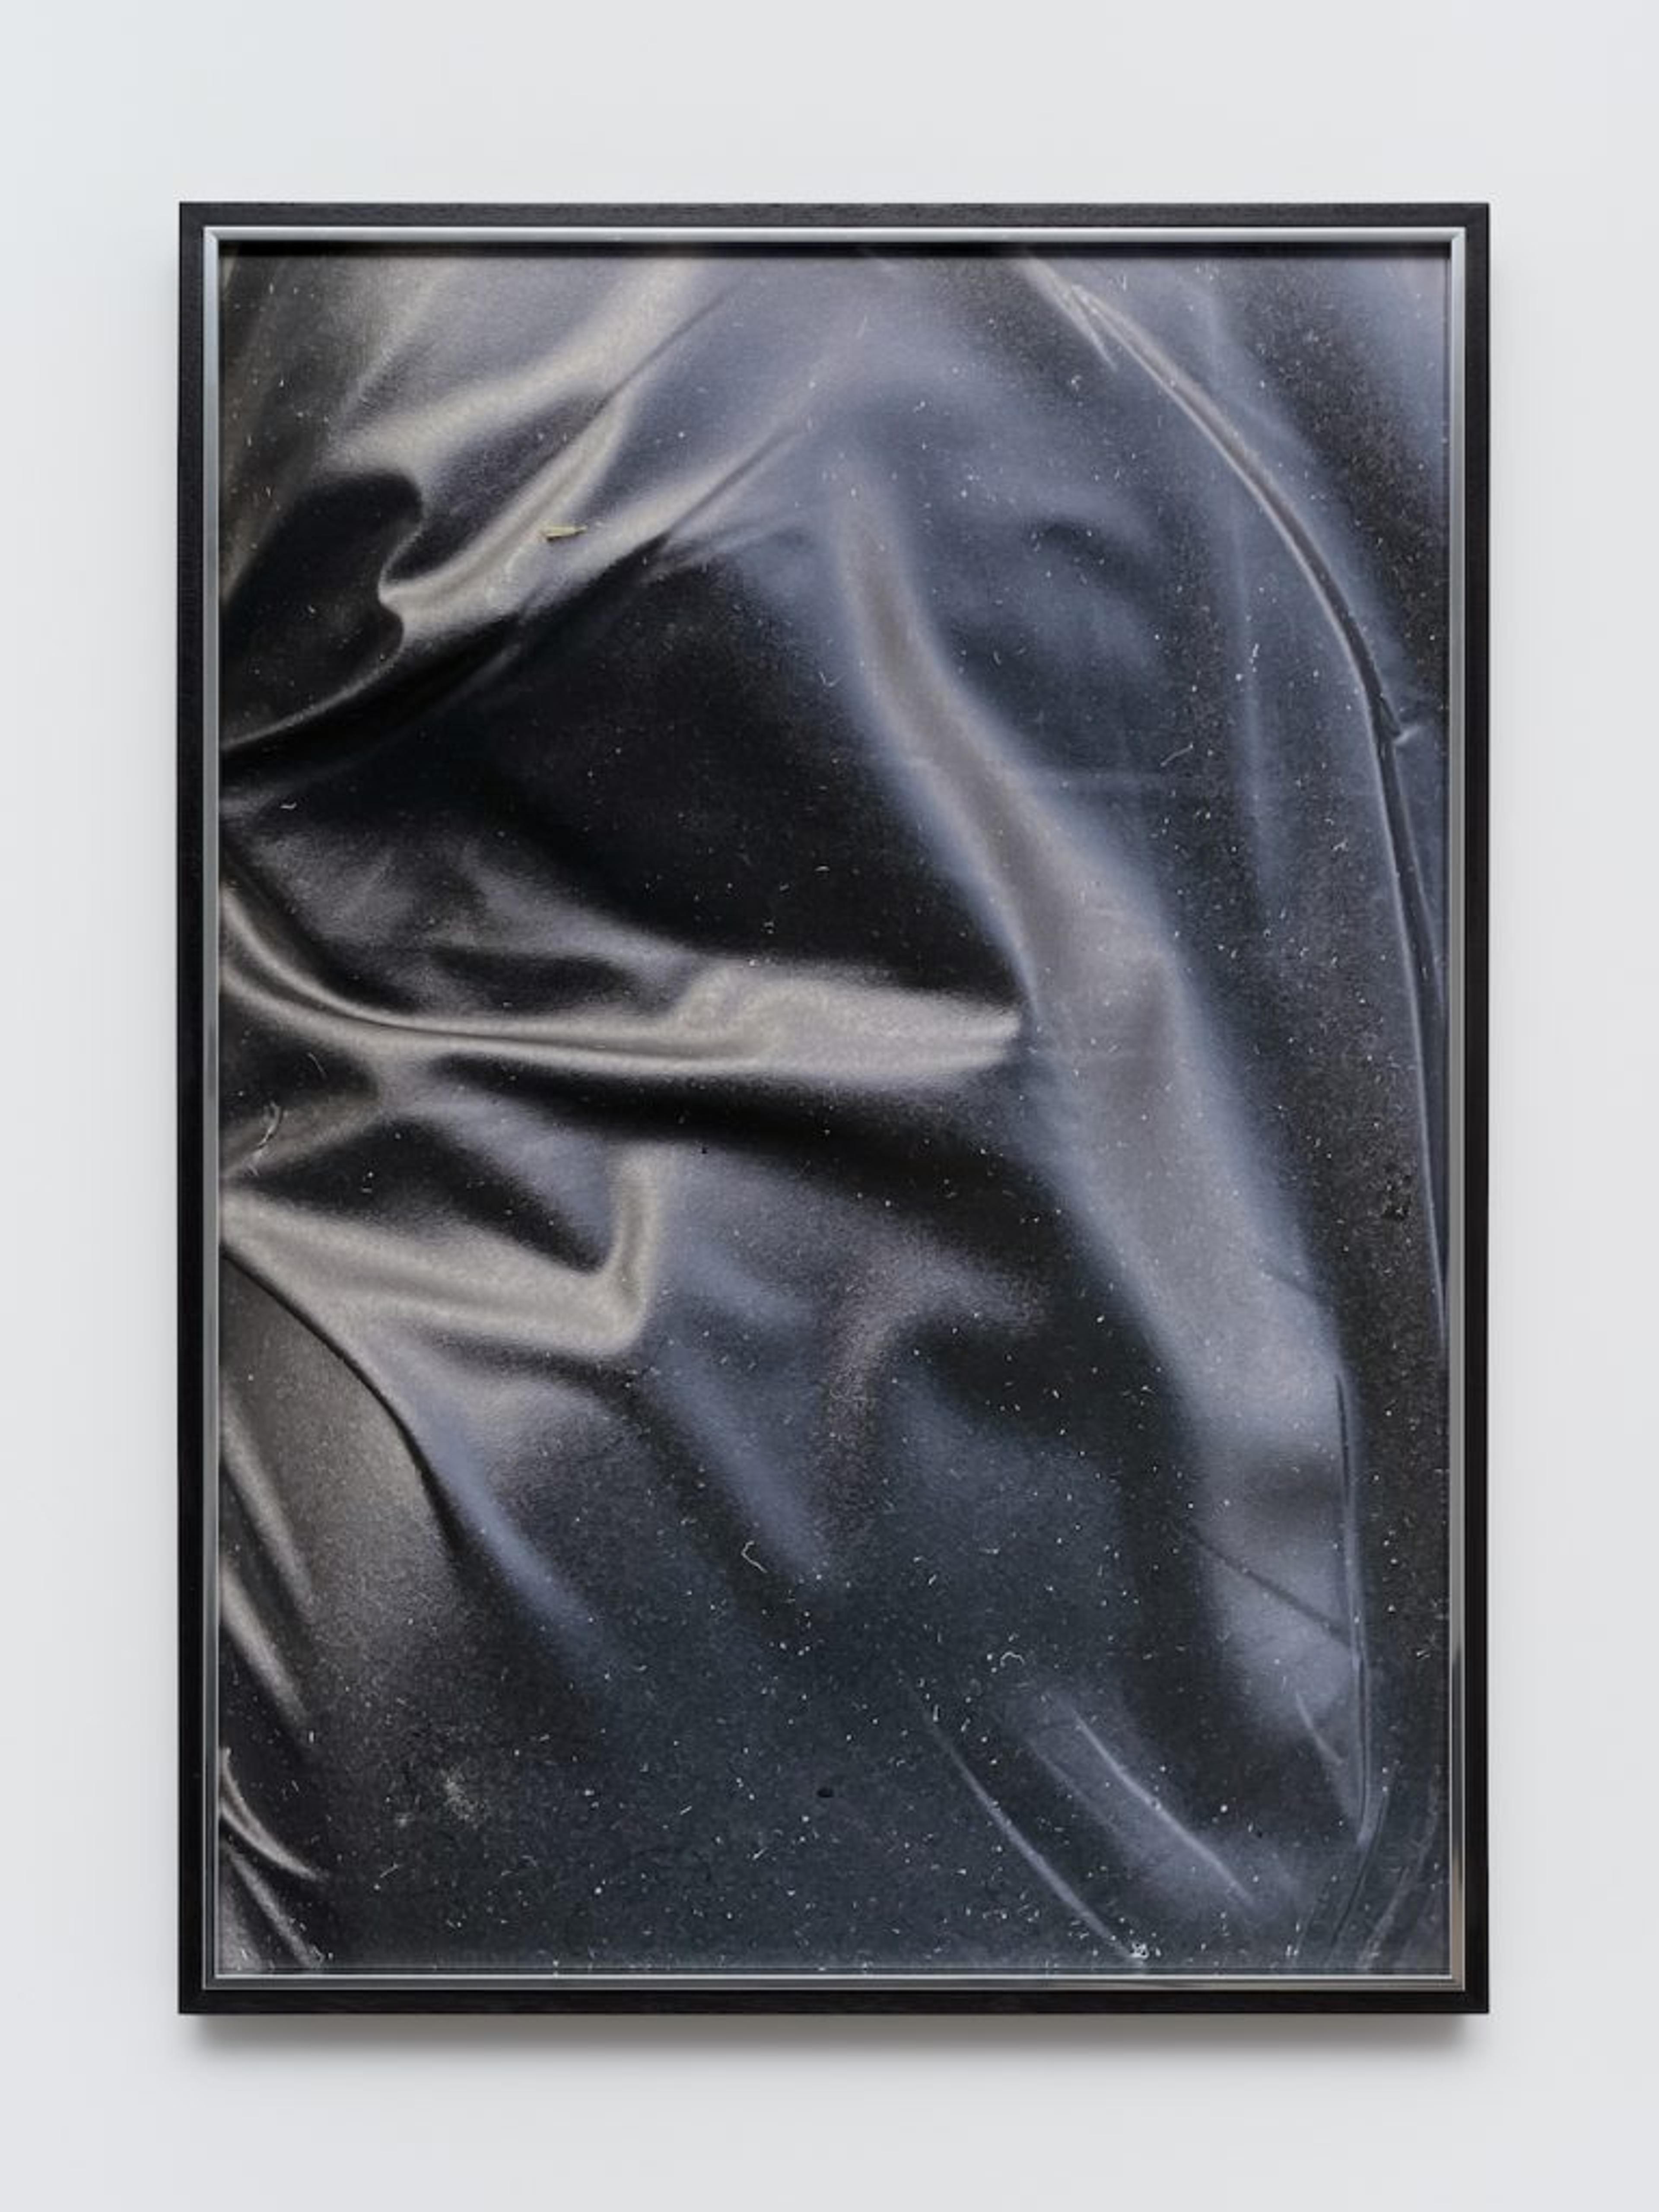 A monochrome image of a black fabric, showcasing its texture and contrast.